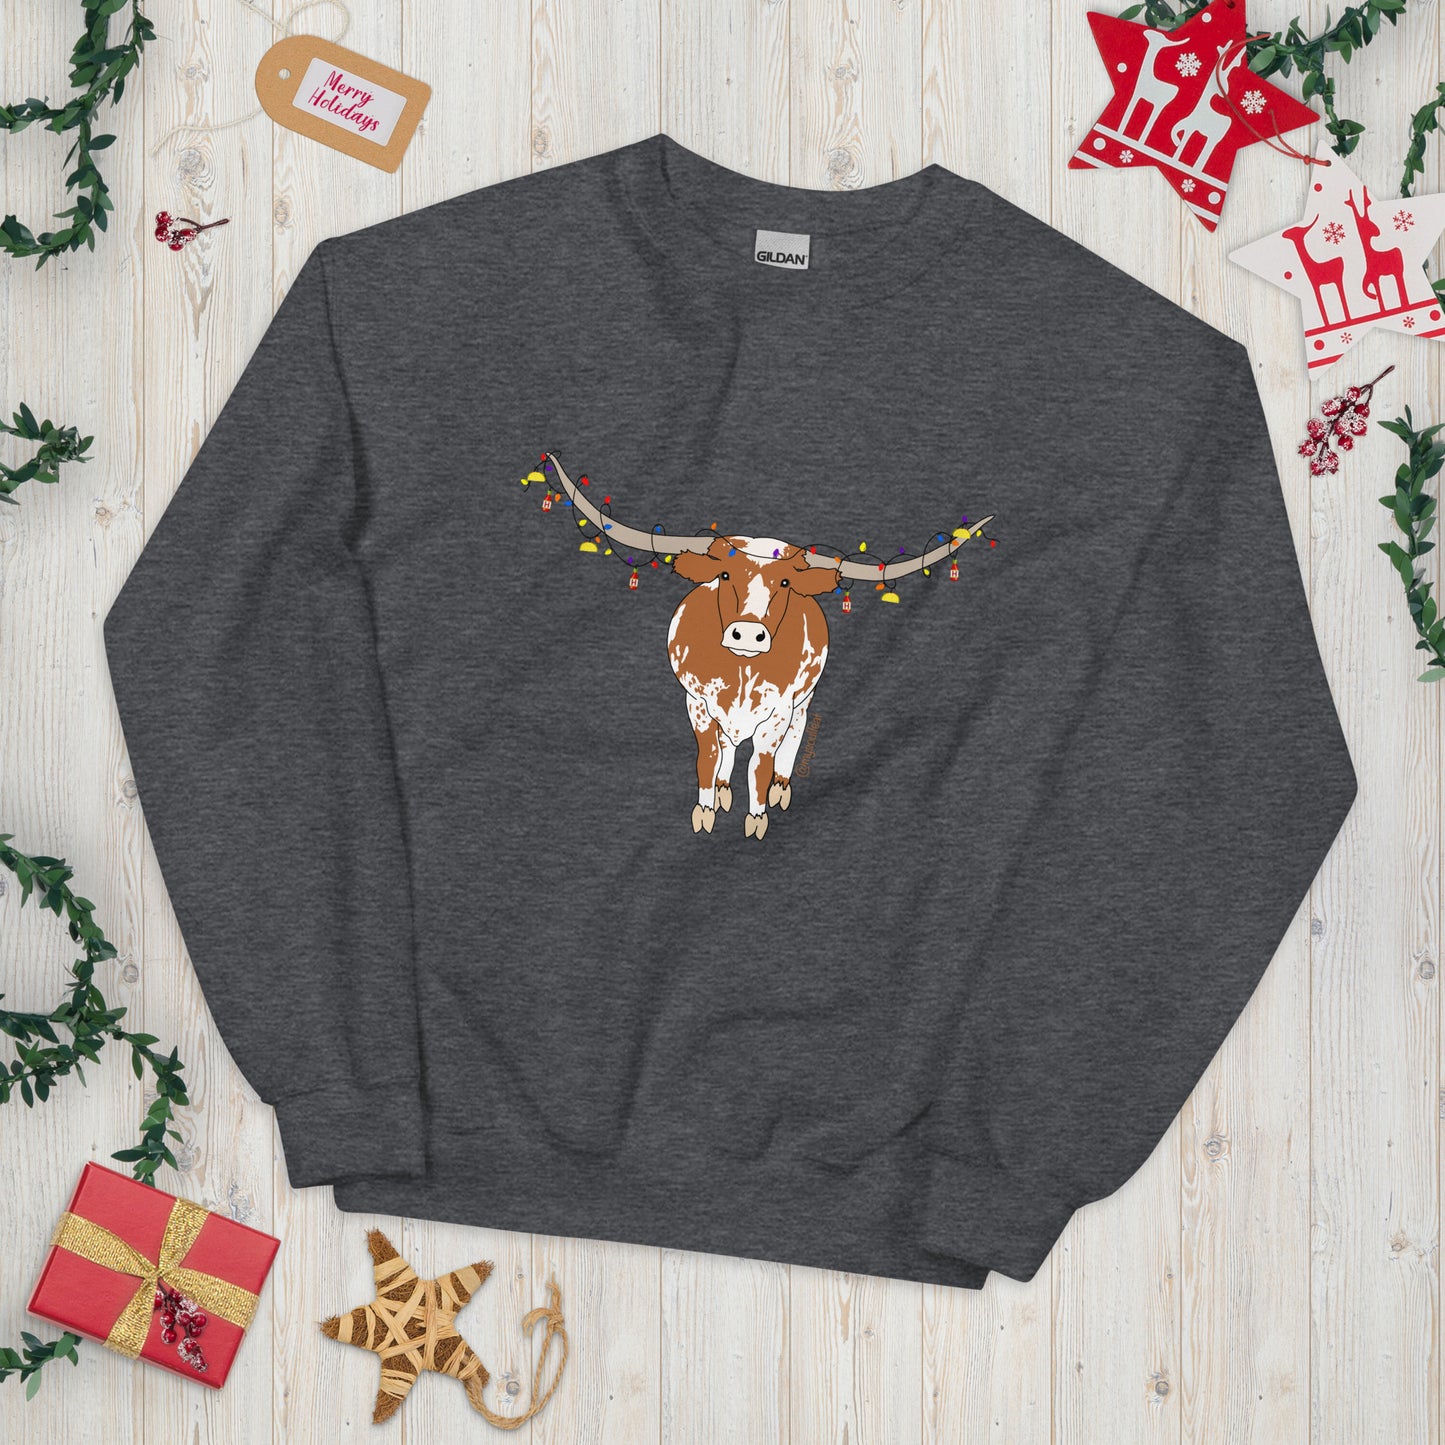 Hooked on Holiday Lights - Longhorn and Ornaments (Unisex Sweatshirt)